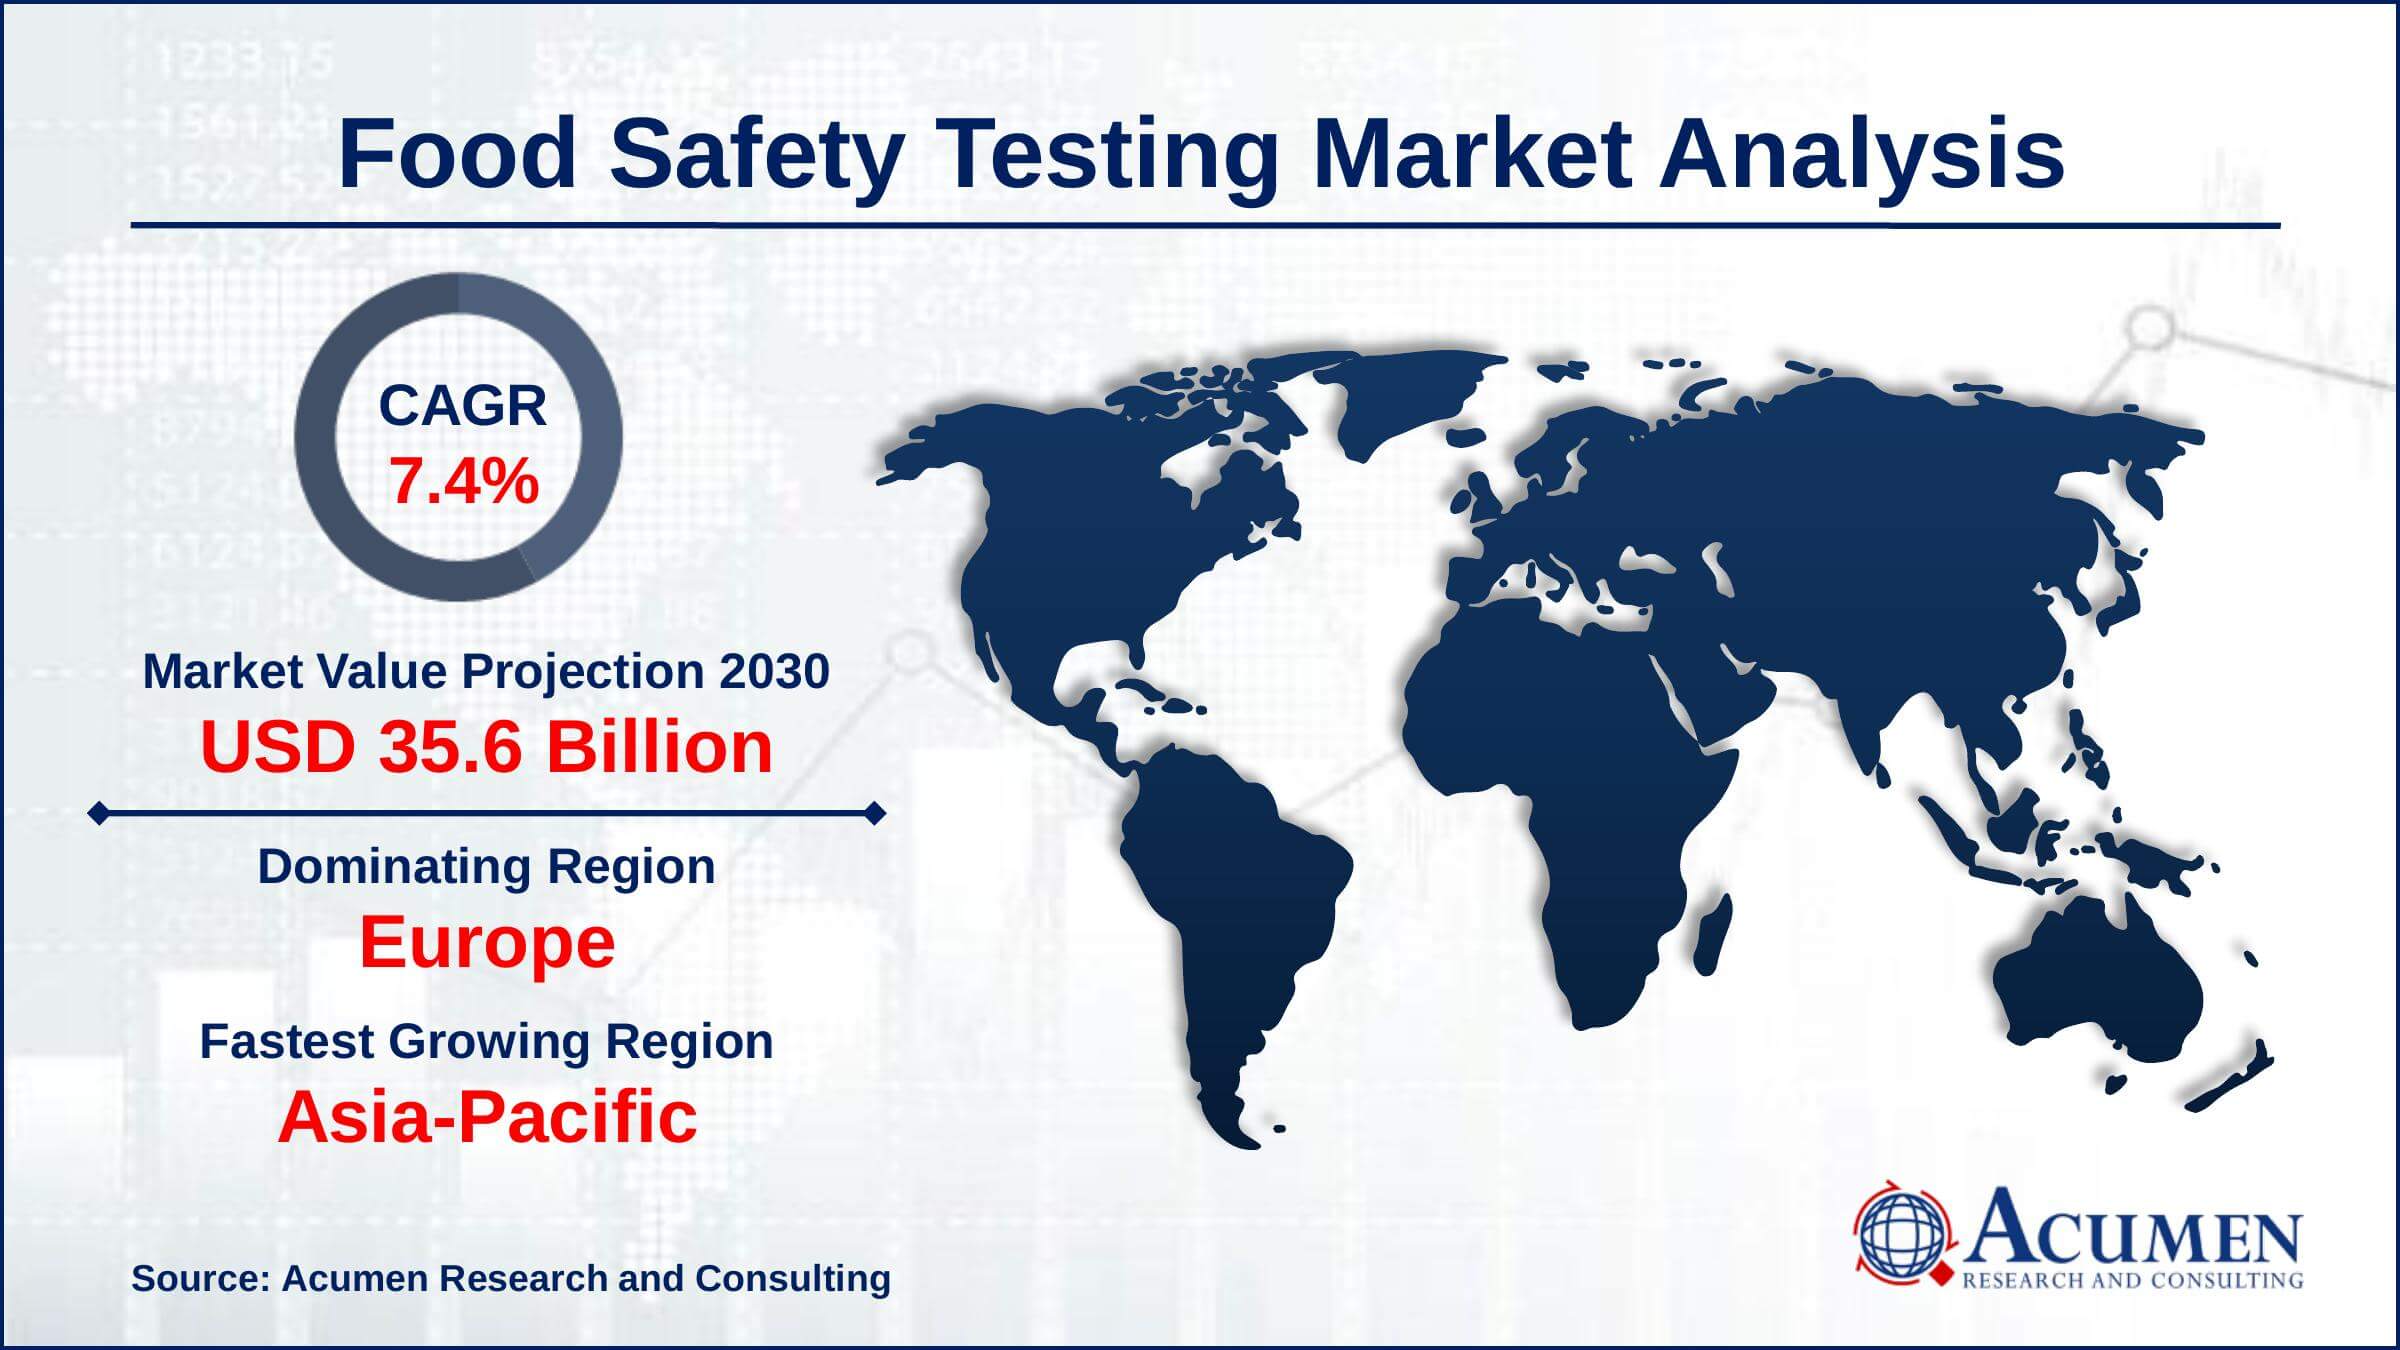 Asia-Pacific food safety testing market growth will observe strongest CAGR from 2022 to 2030